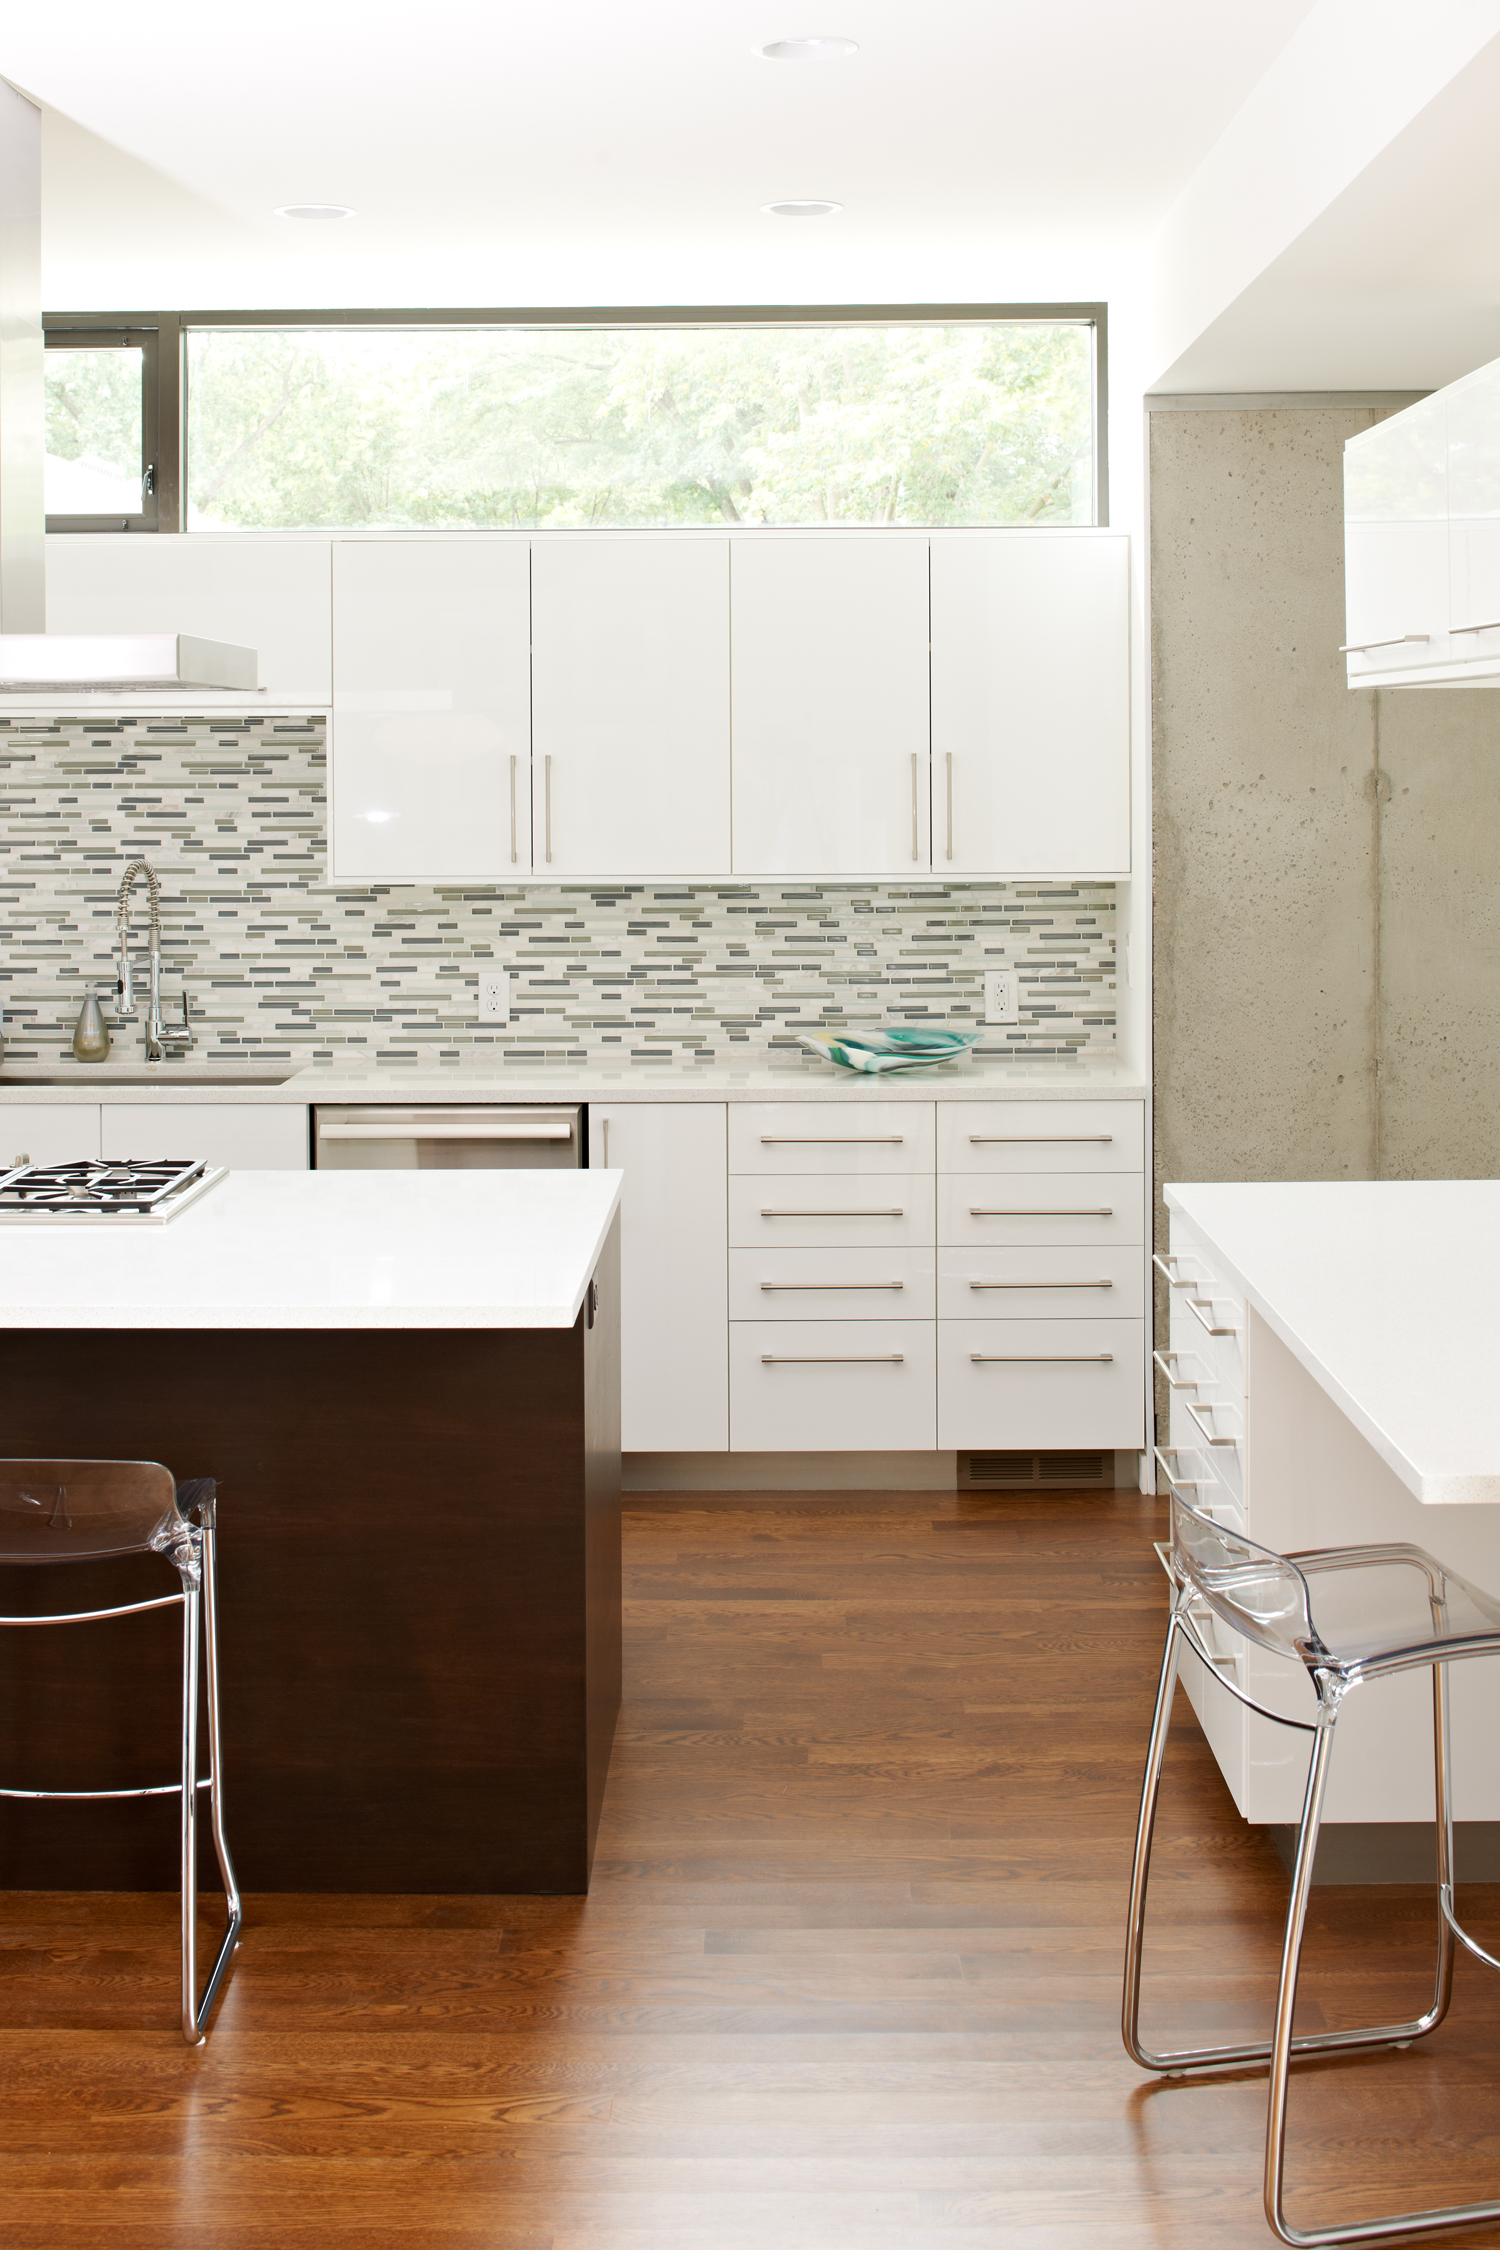 Modern kitchen with white cabinetry and grey tile backsplash